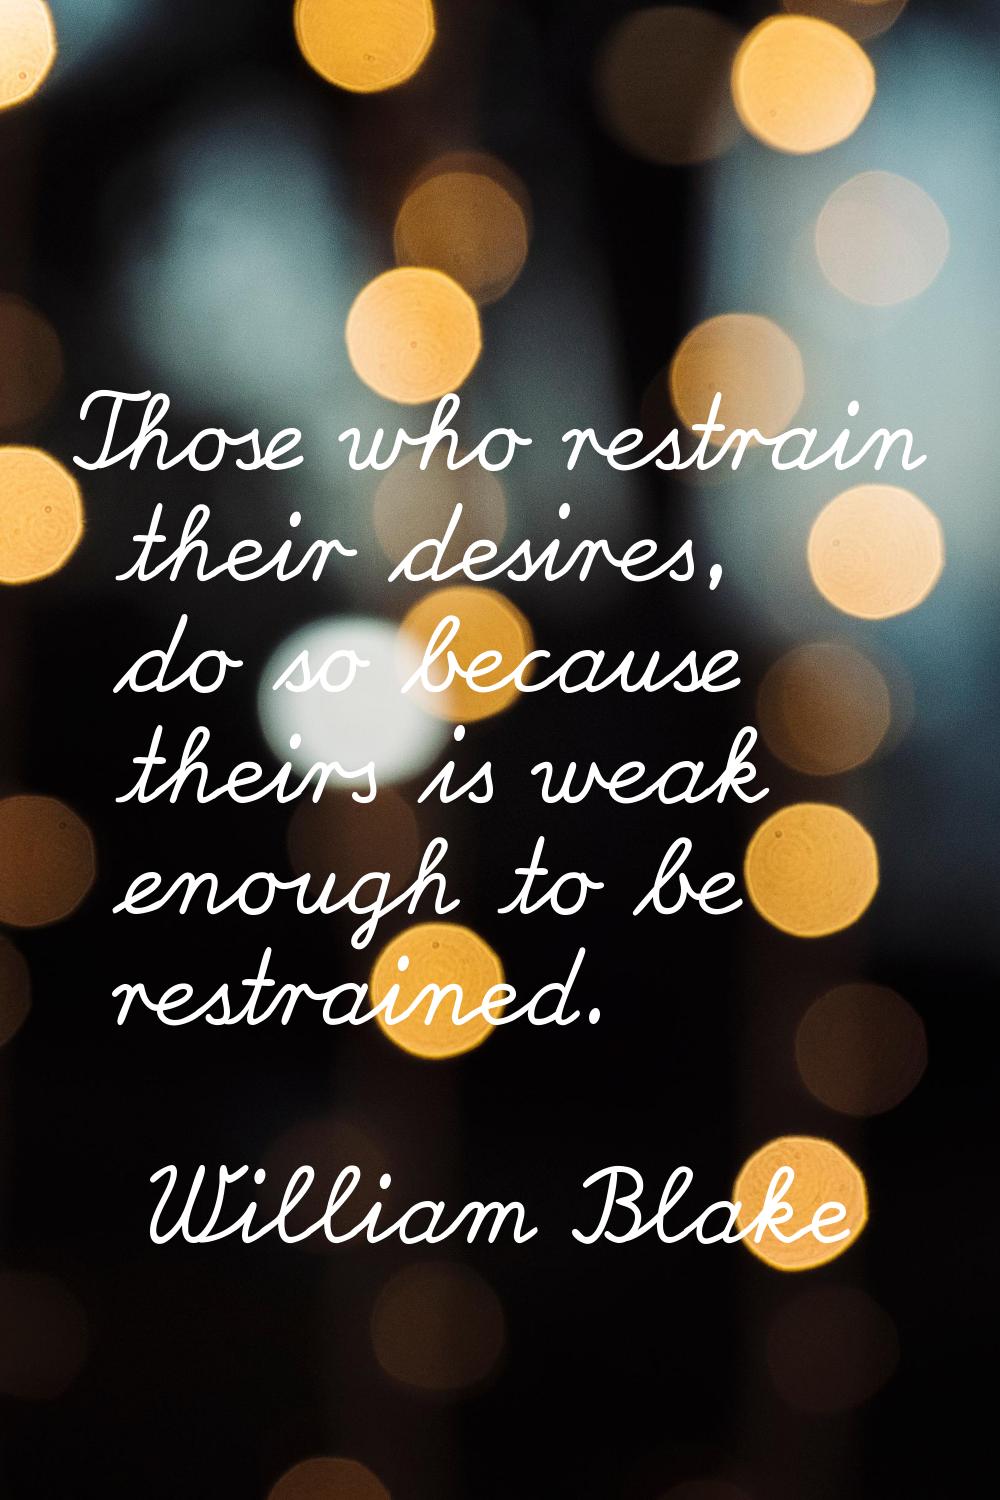 Those who restrain their desires, do so because theirs is weak enough to be restrained.